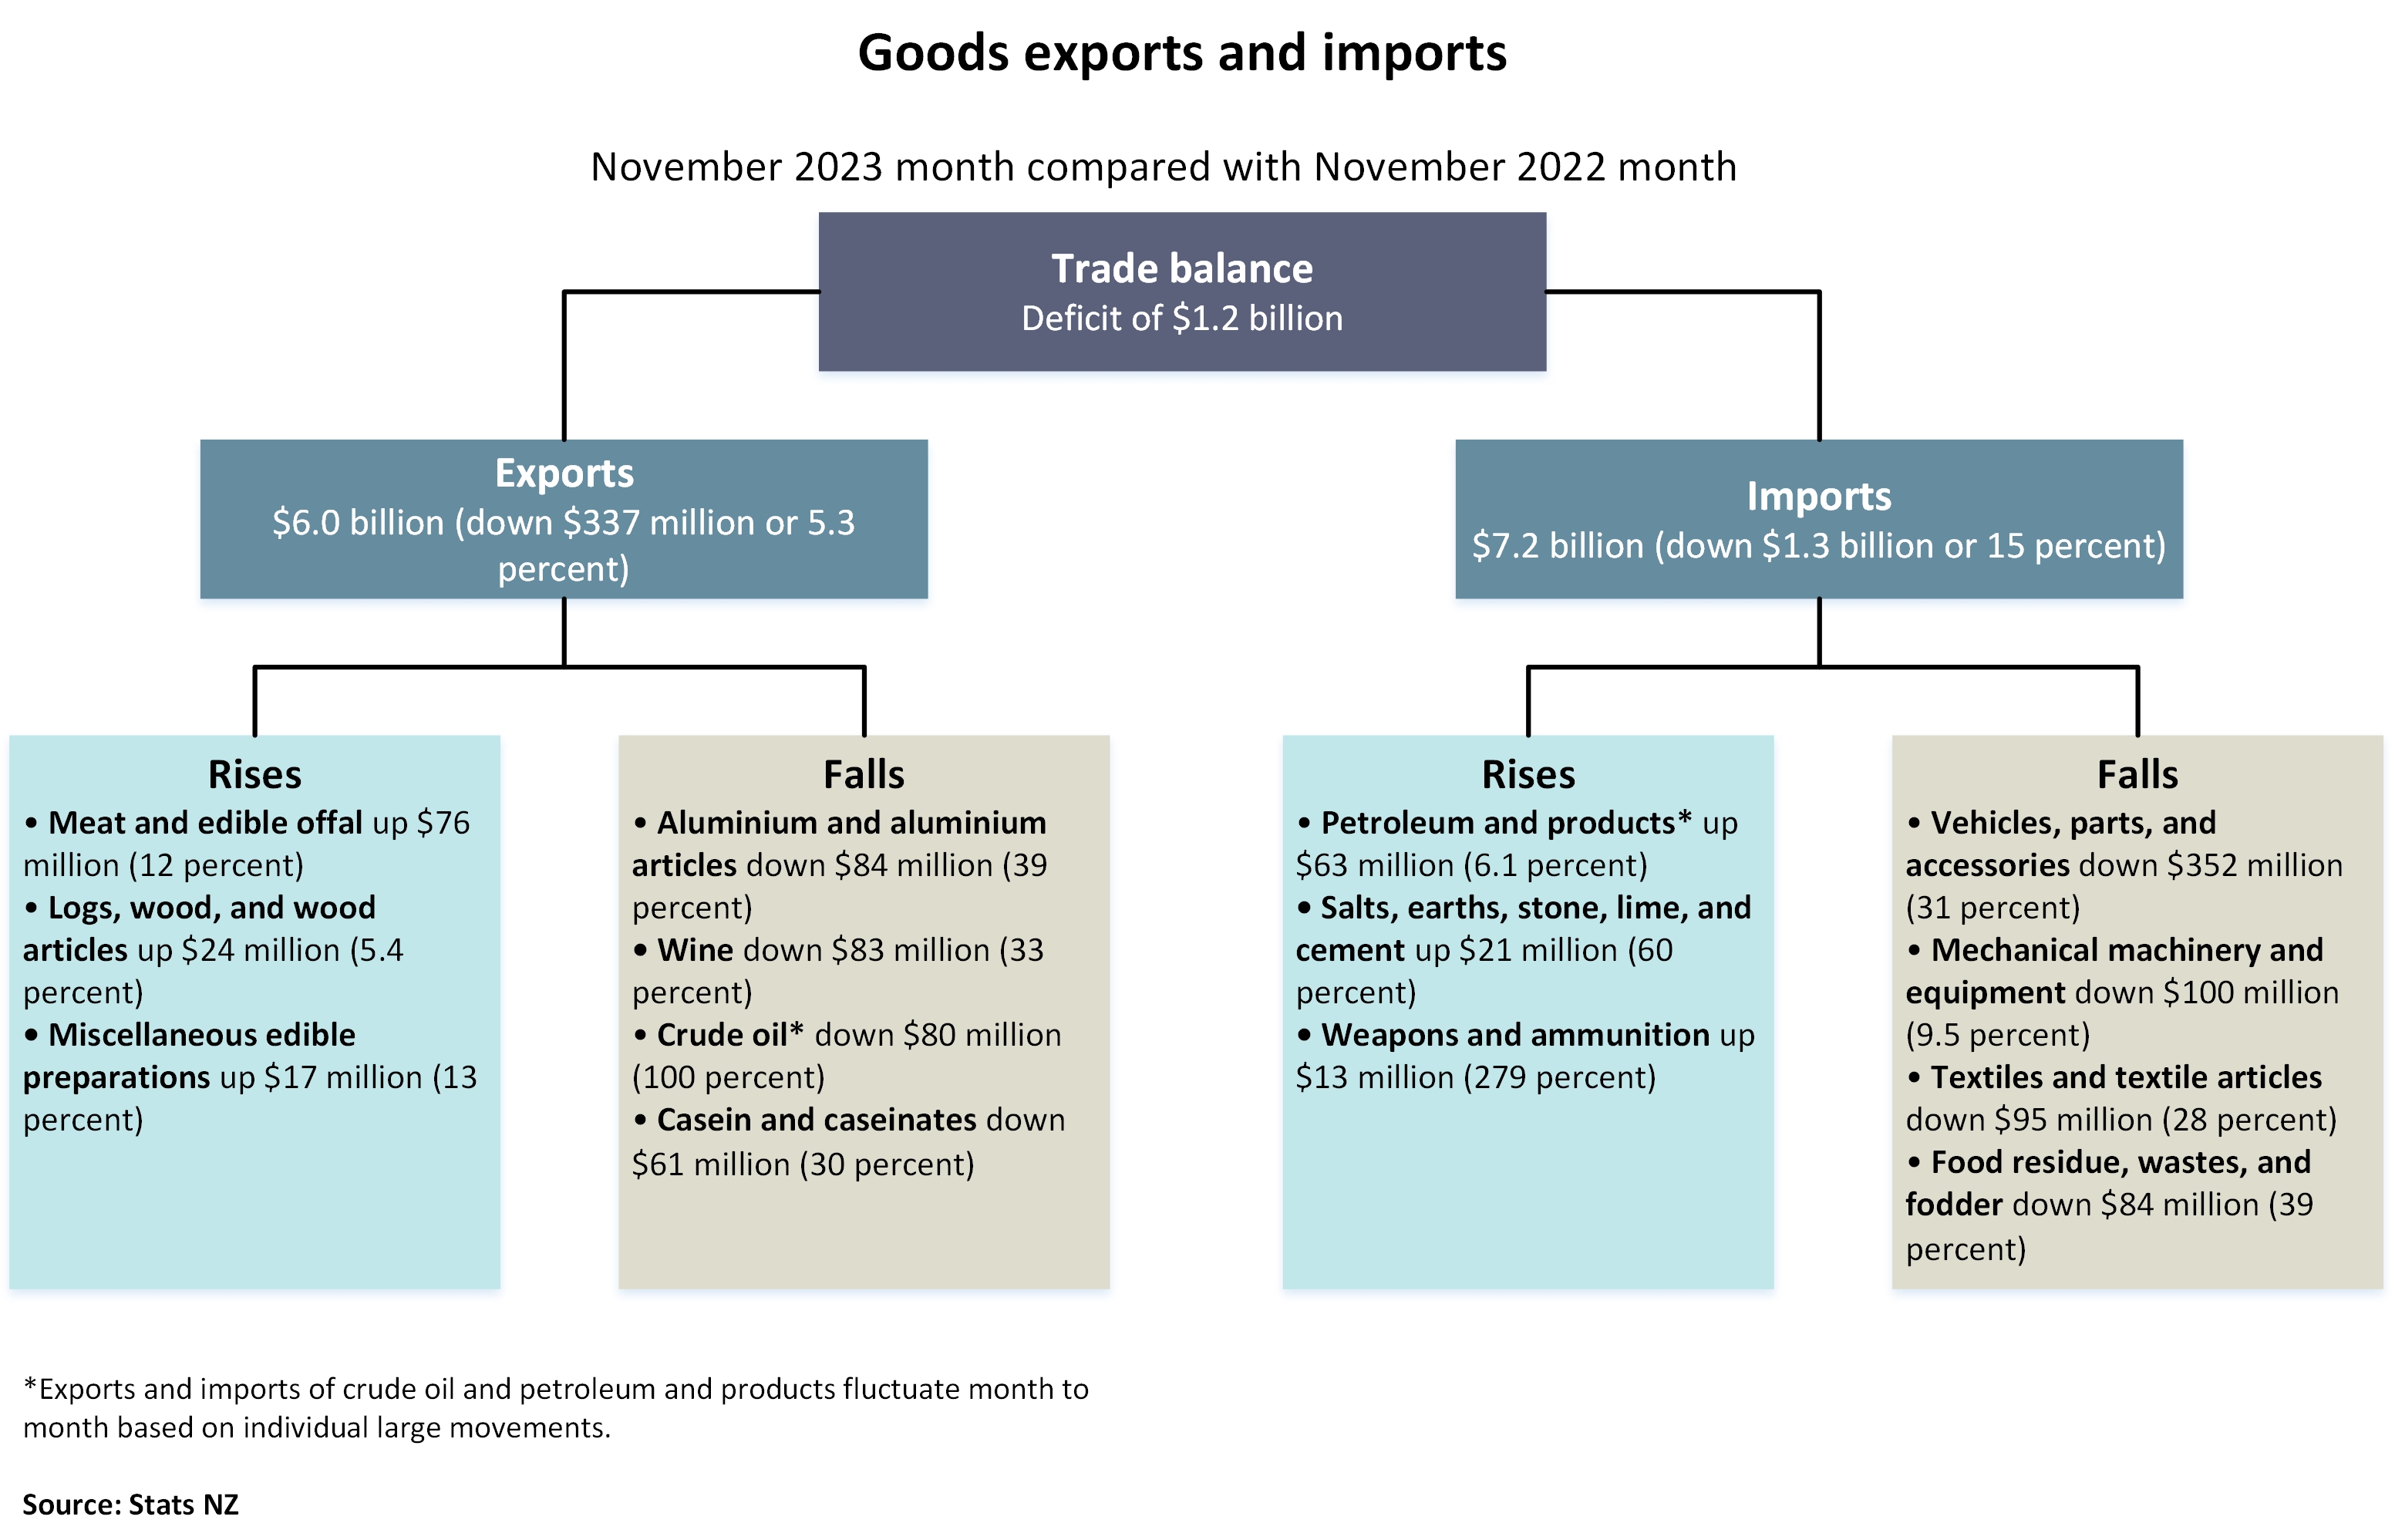 Diagram showing goods exports and imports, November 2023 month compared with November 2022 month. Text alternative available below diagram.